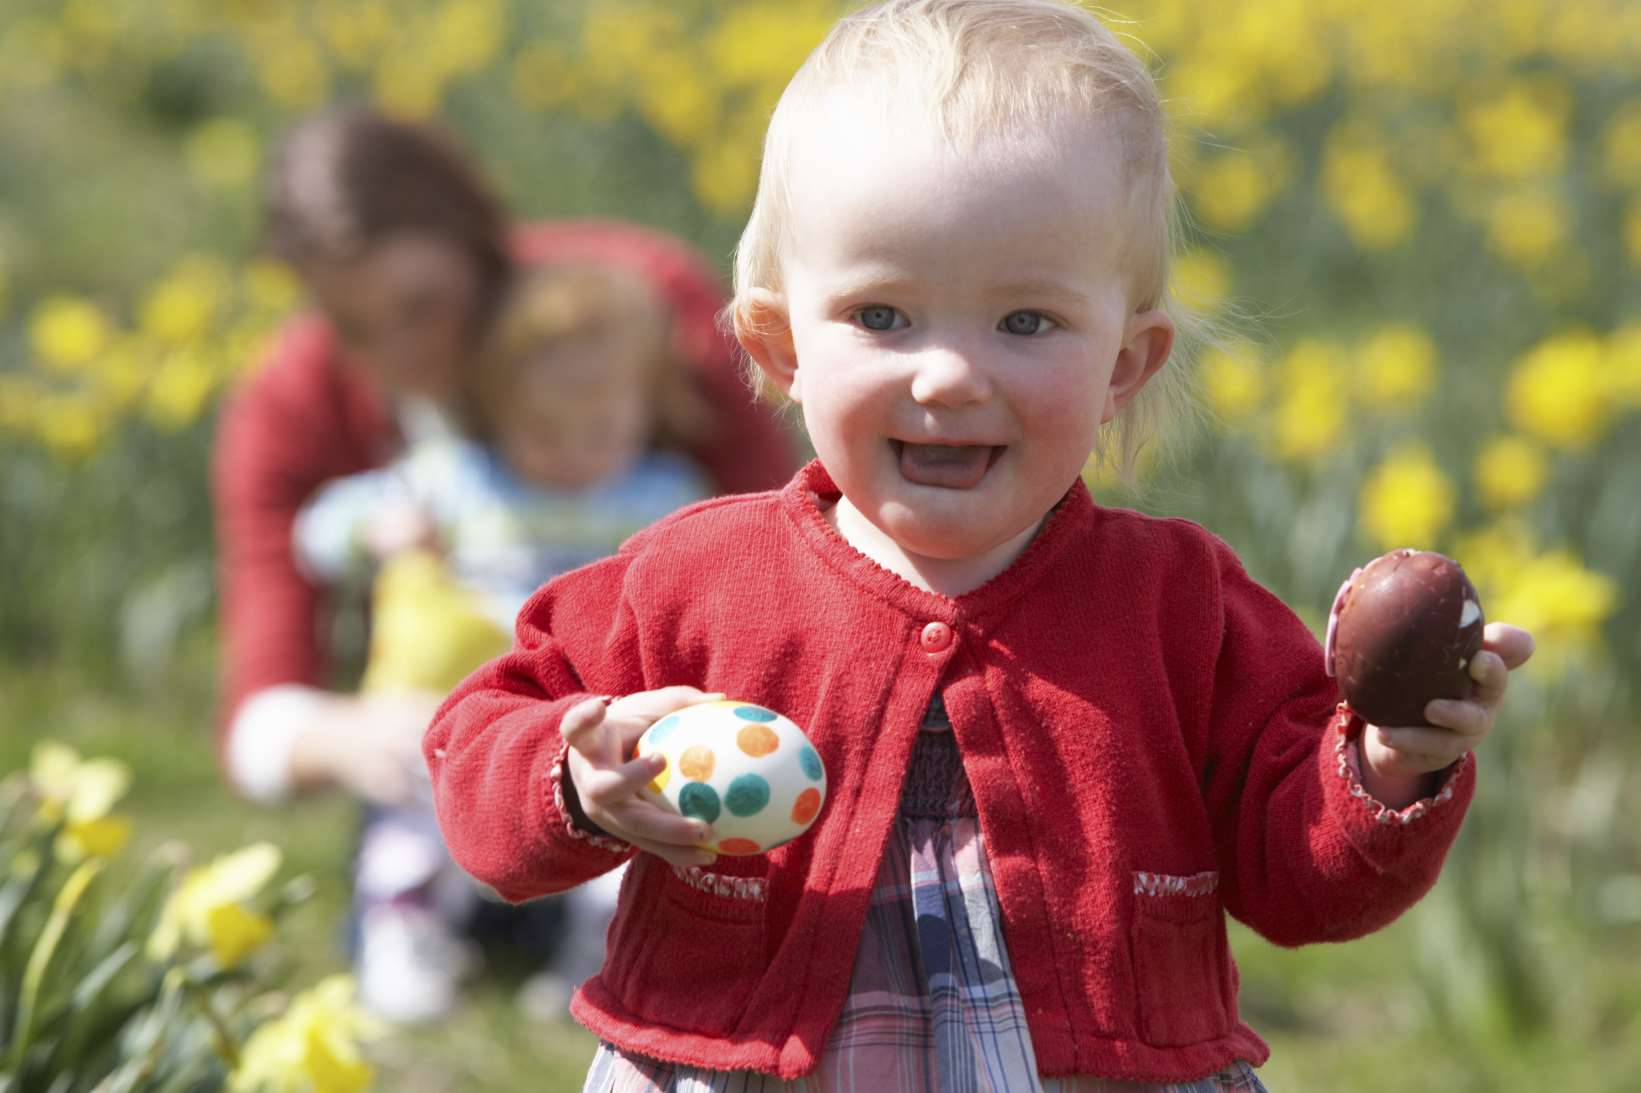 Take part in an egg hunt this Easter